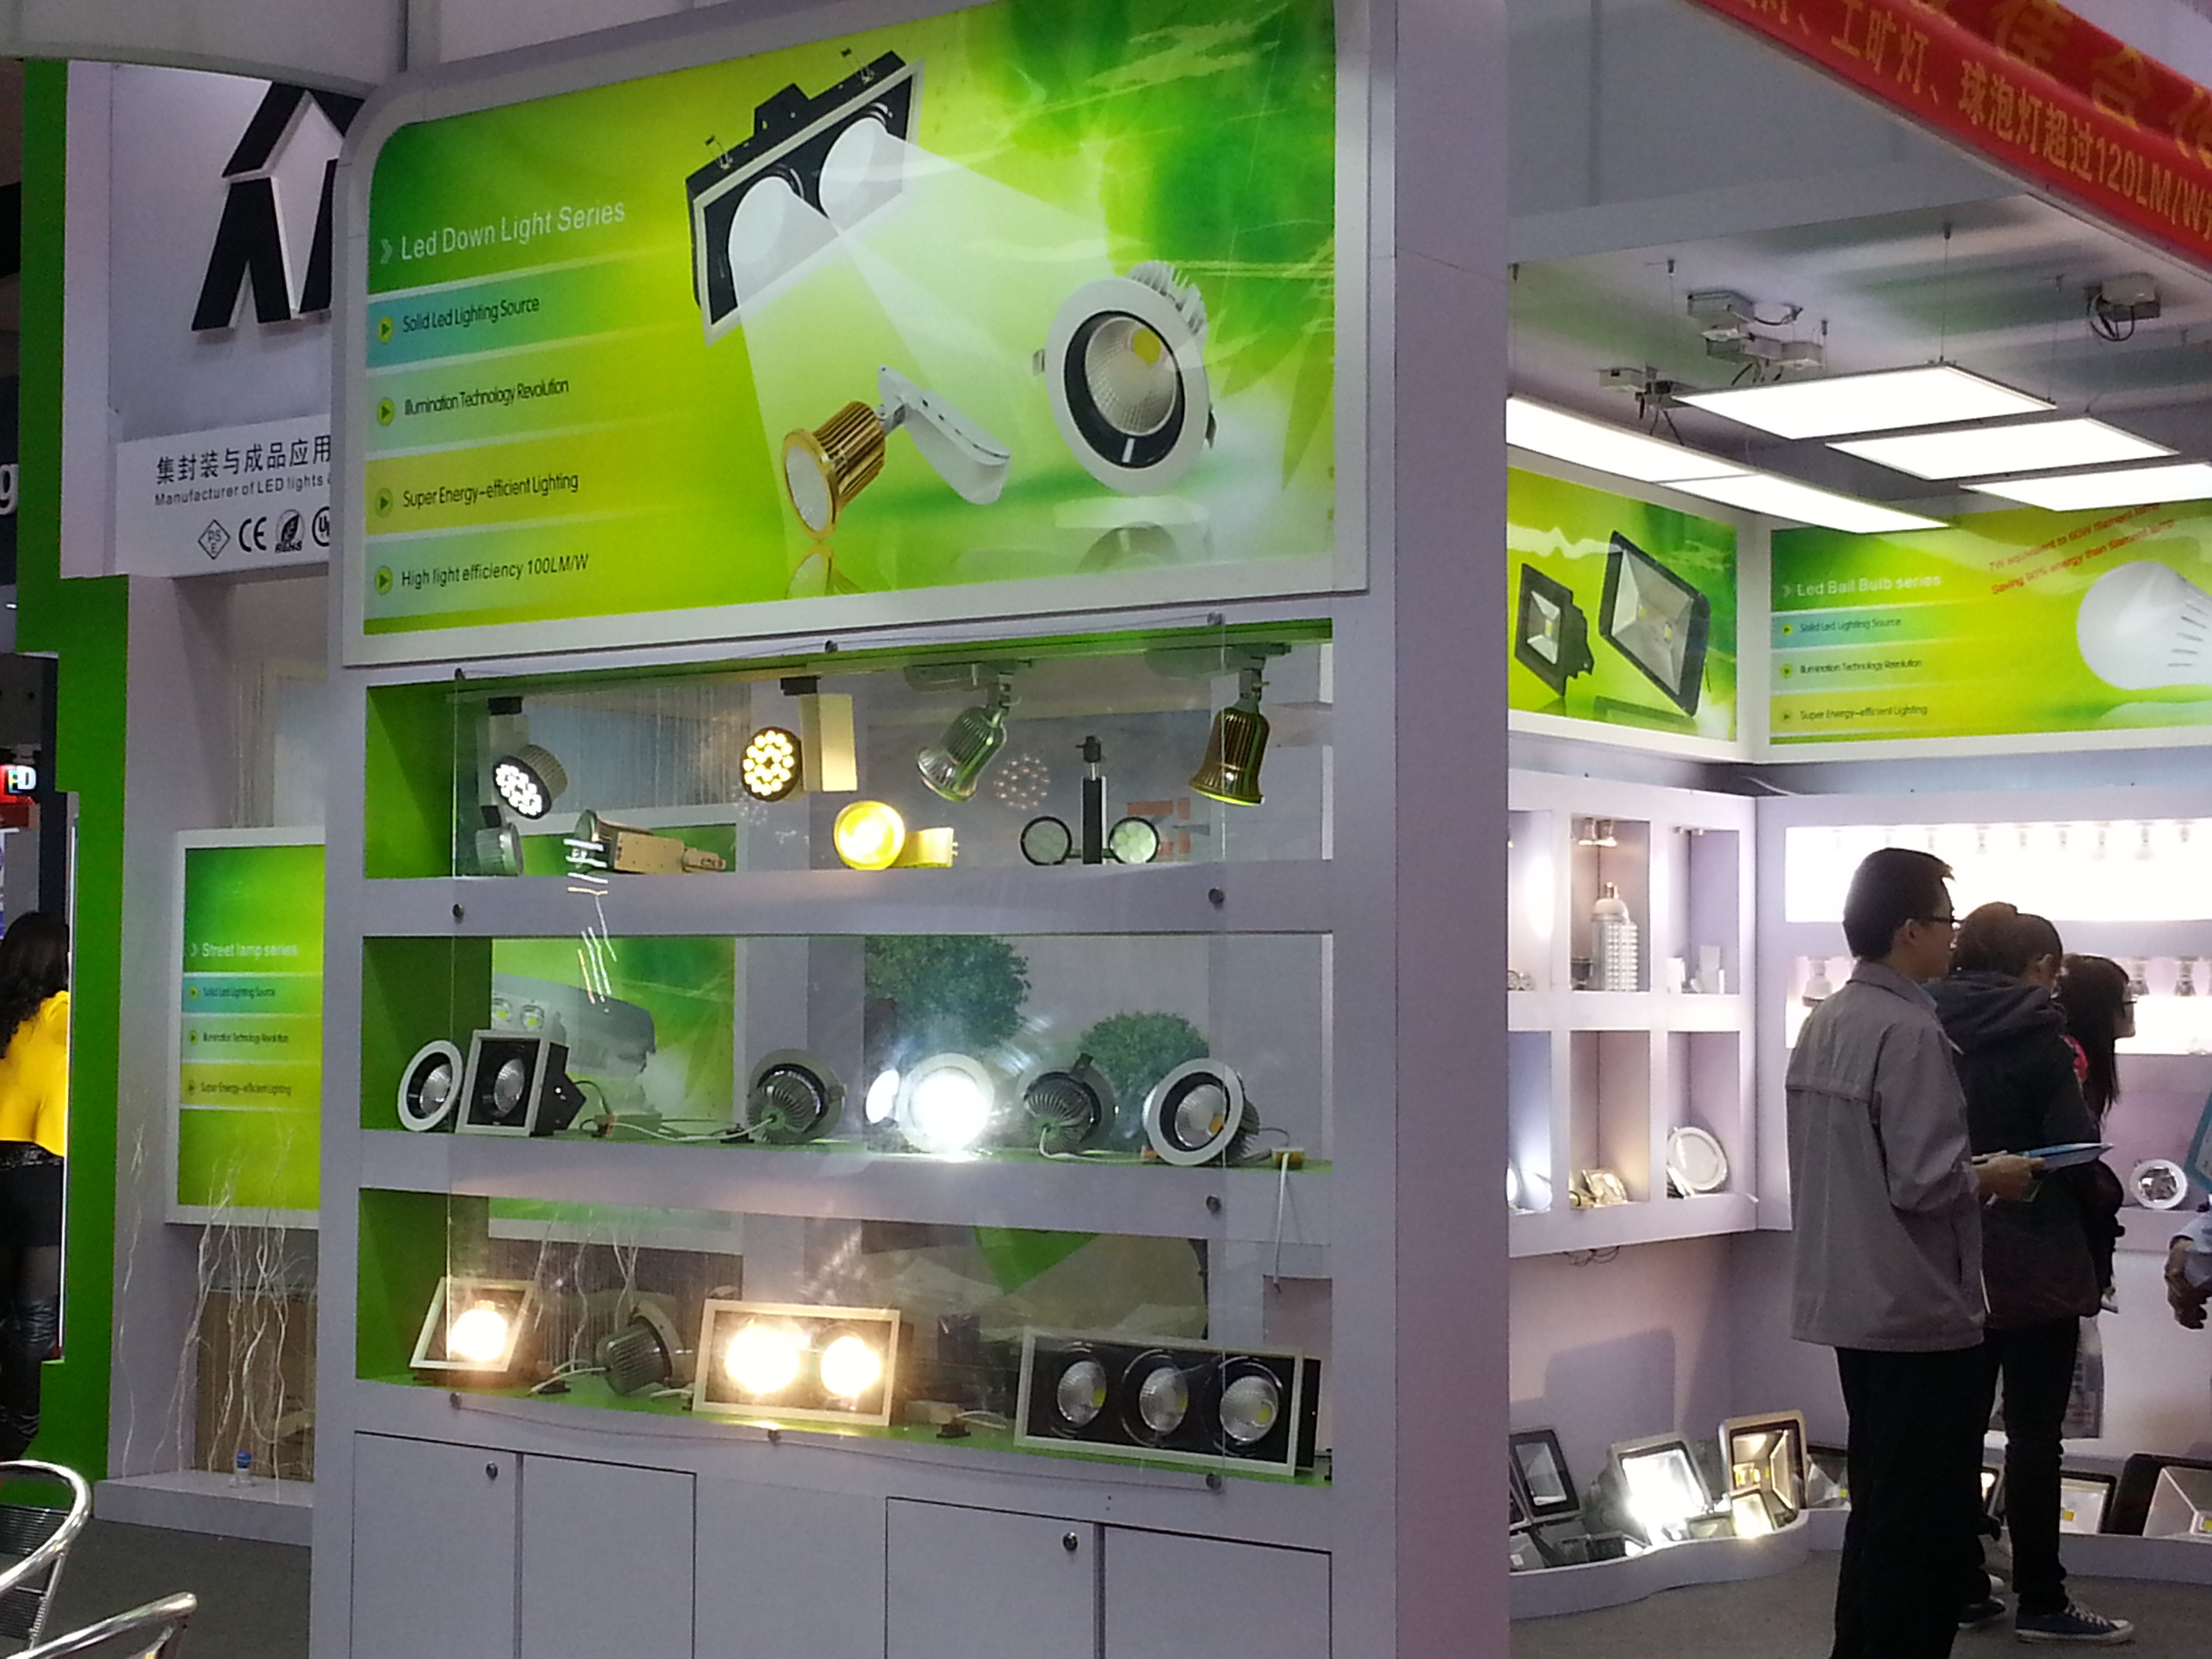 LED makers exhibited trendy products at the LED China 2013 trade show. 